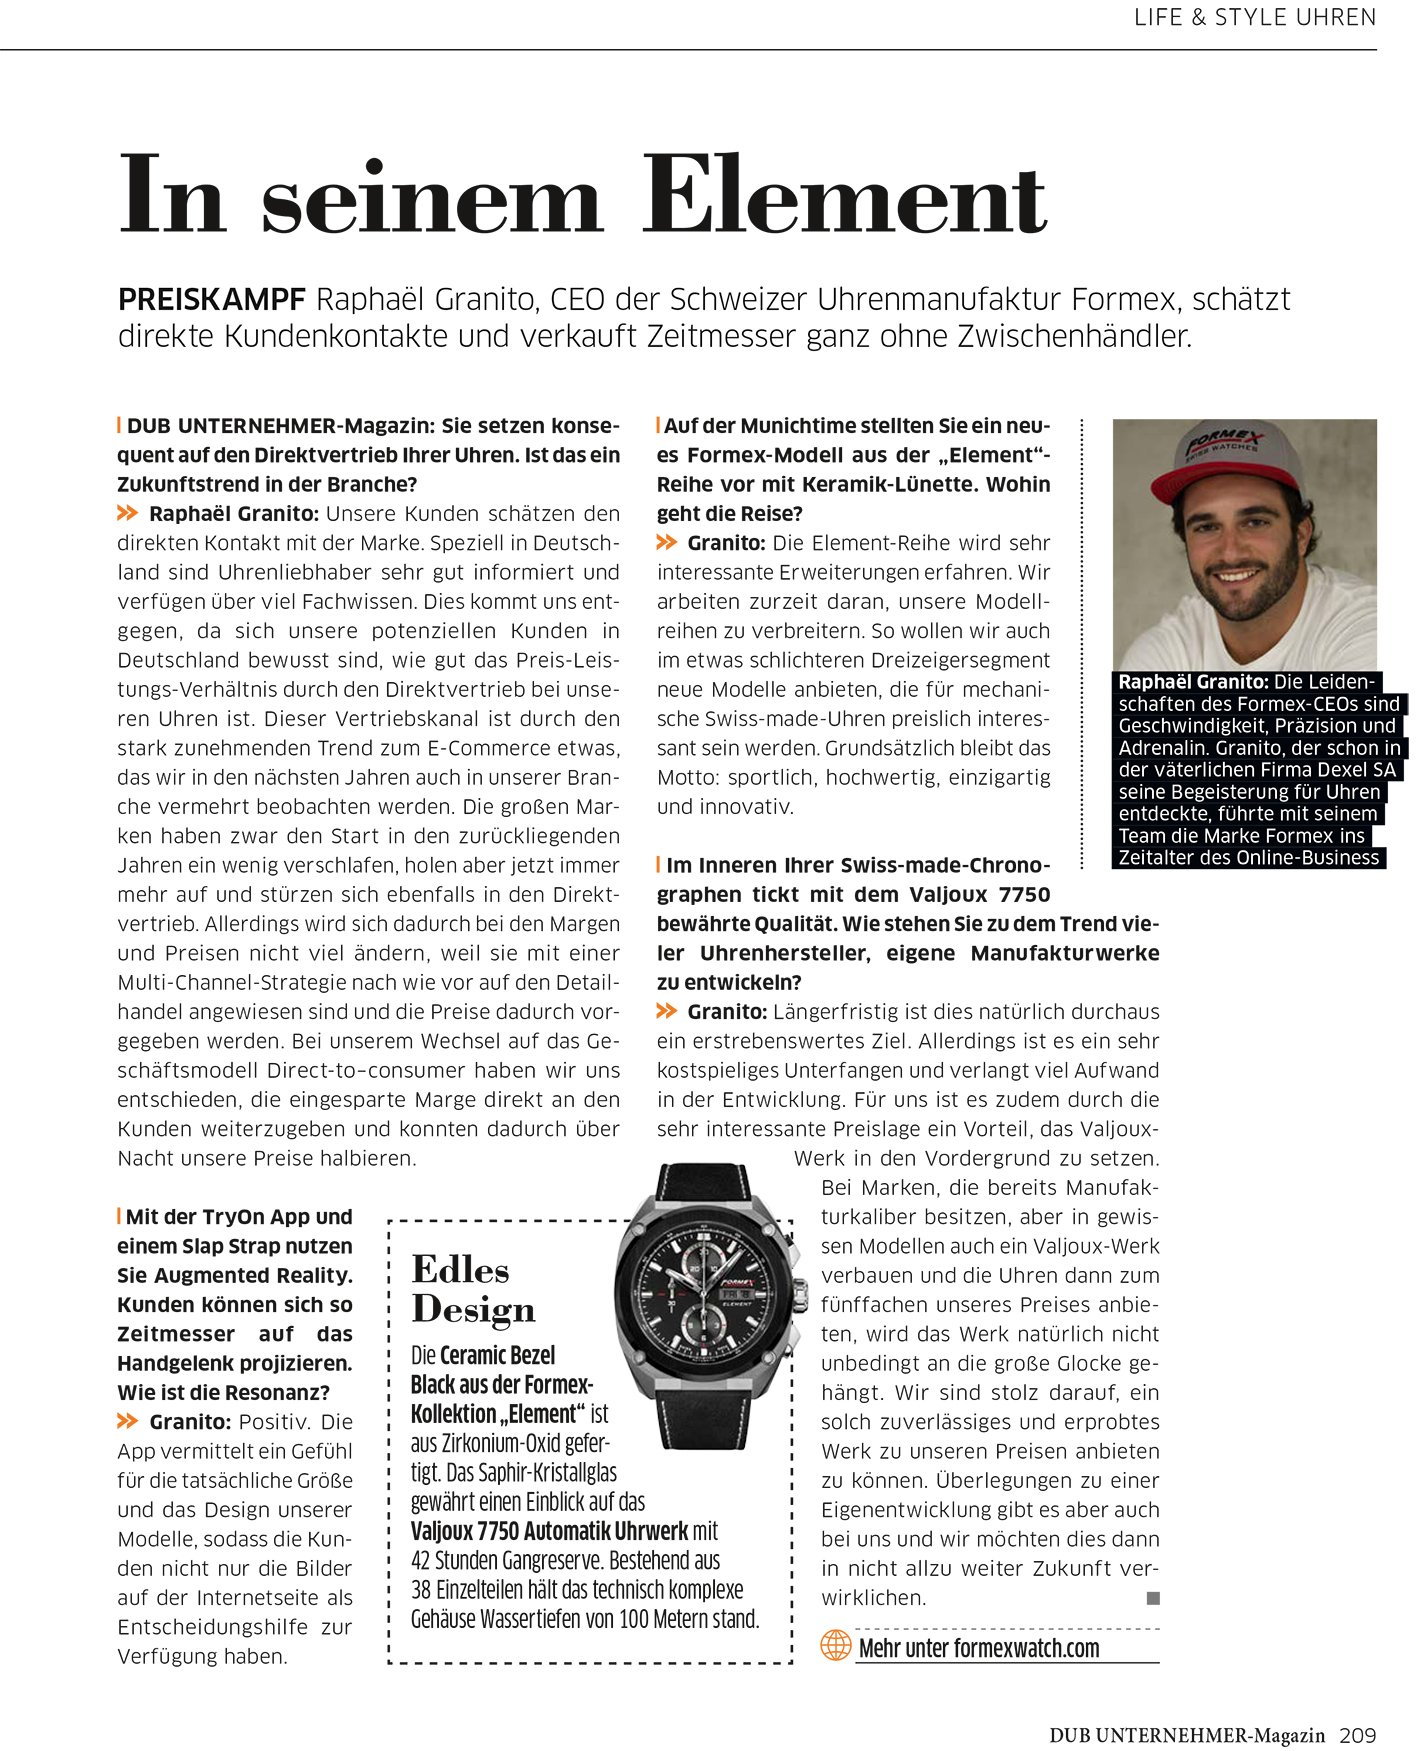 In His Element: Articke about Formex Swiss Watches CEO